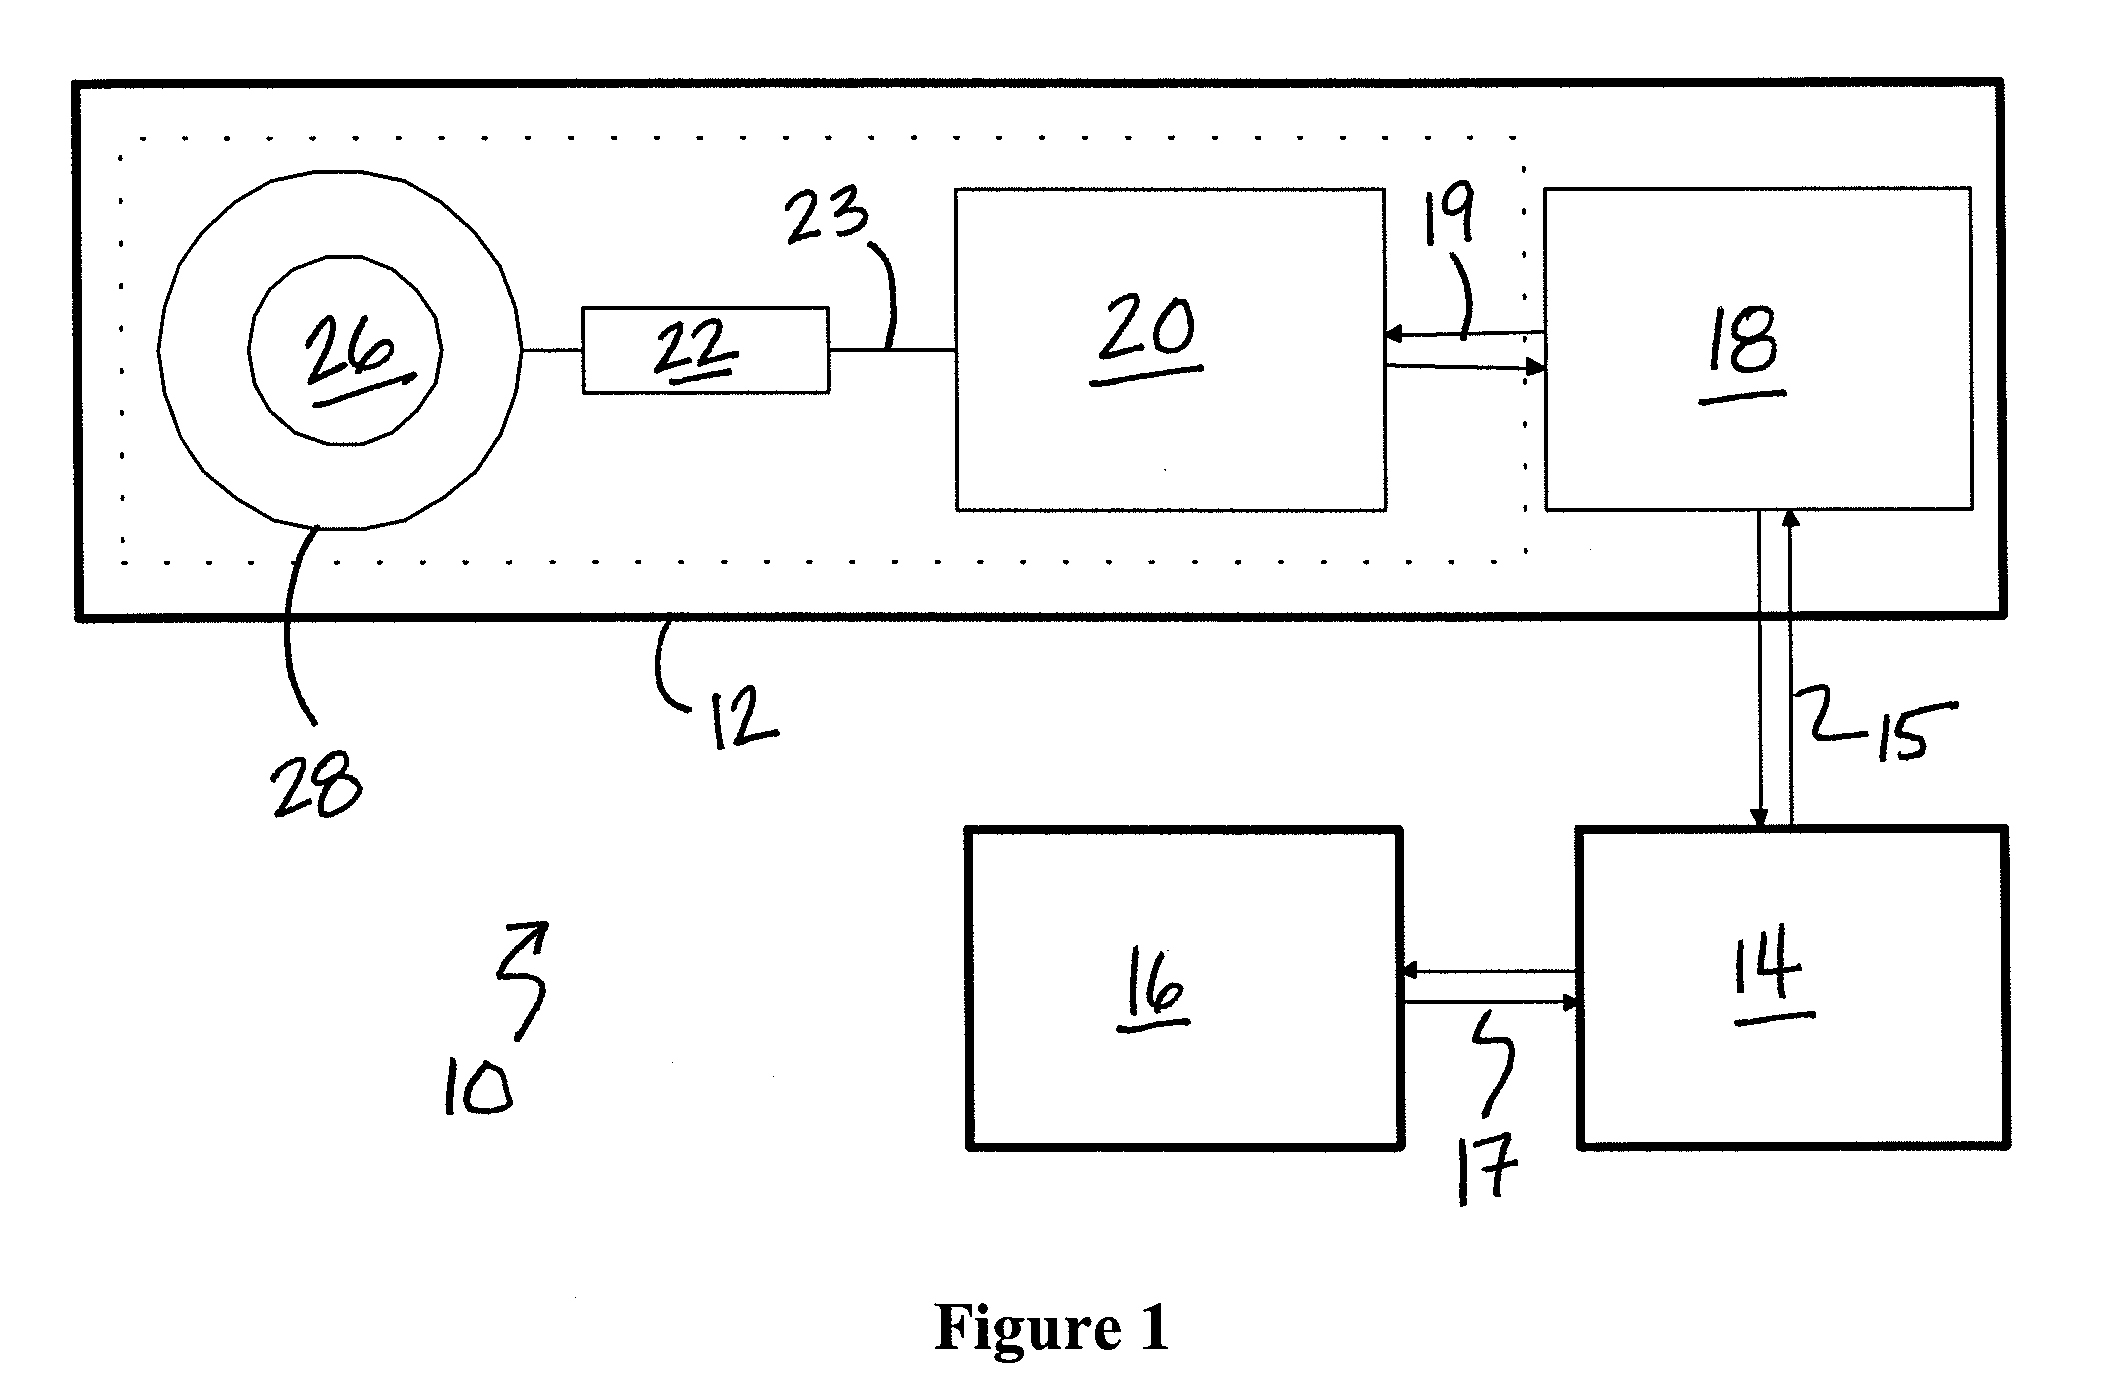 Method for Reading and Writing Data Wirelessly from Simulated Munitions